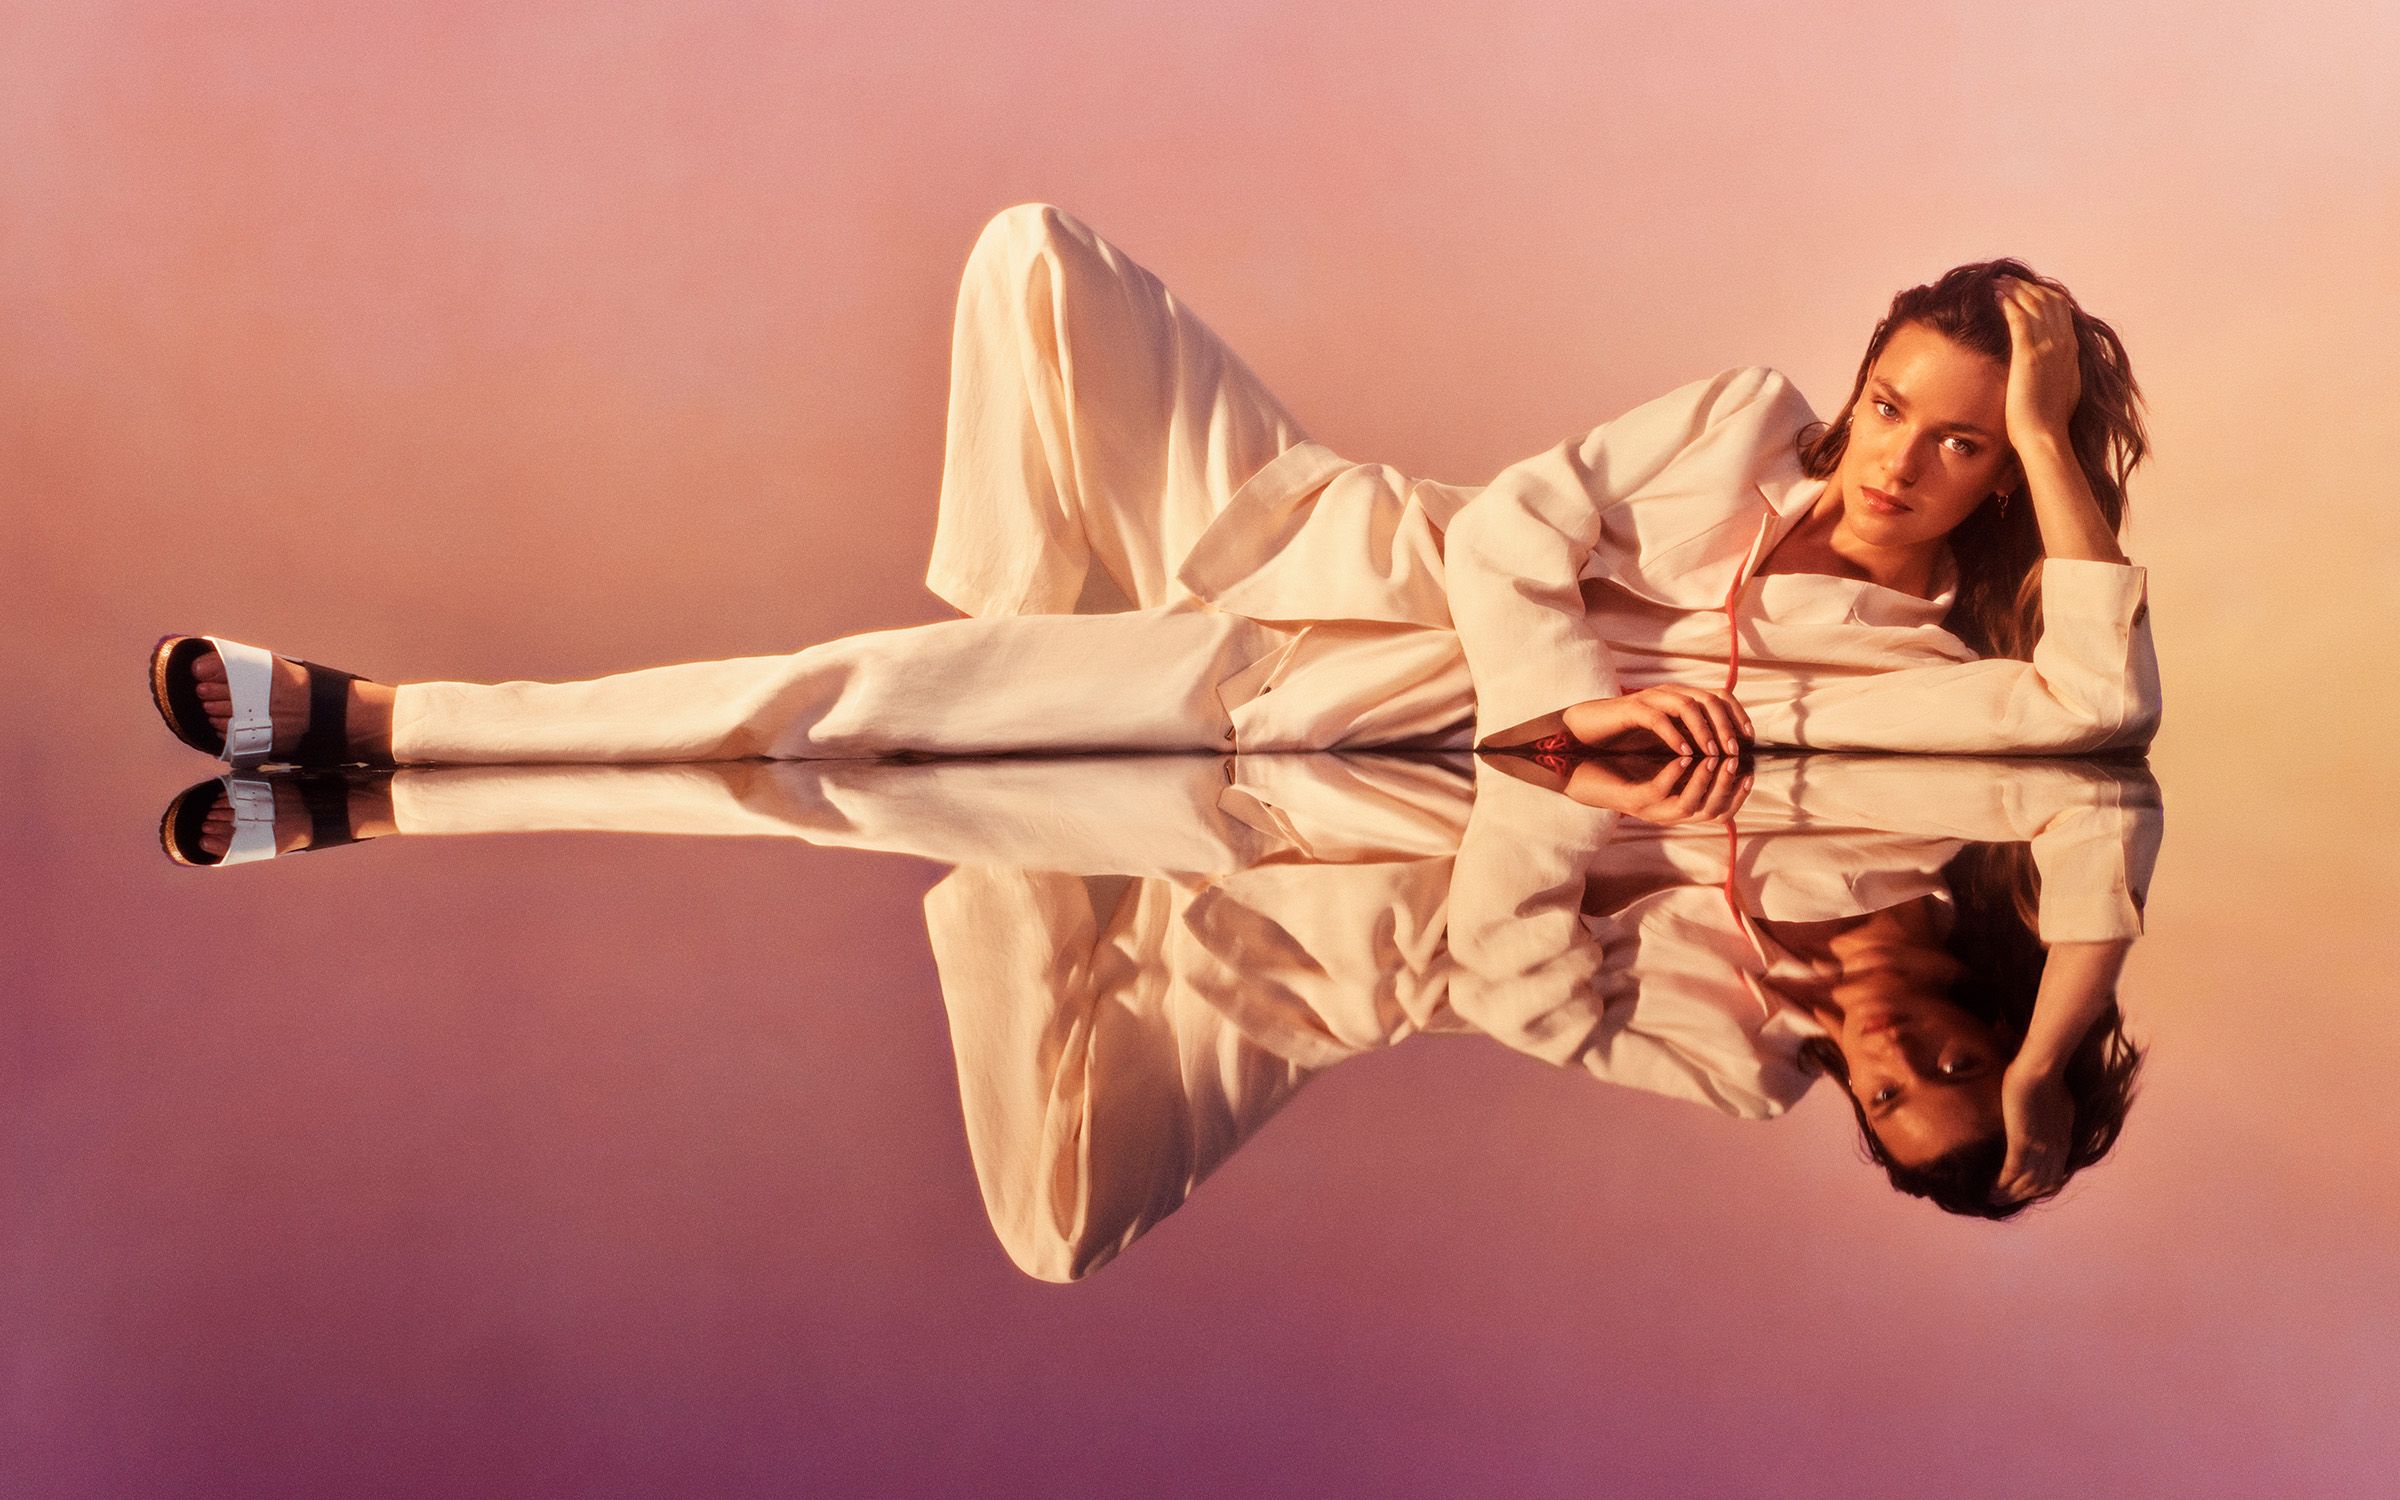 Lady lying on floor with white jumpsuit on